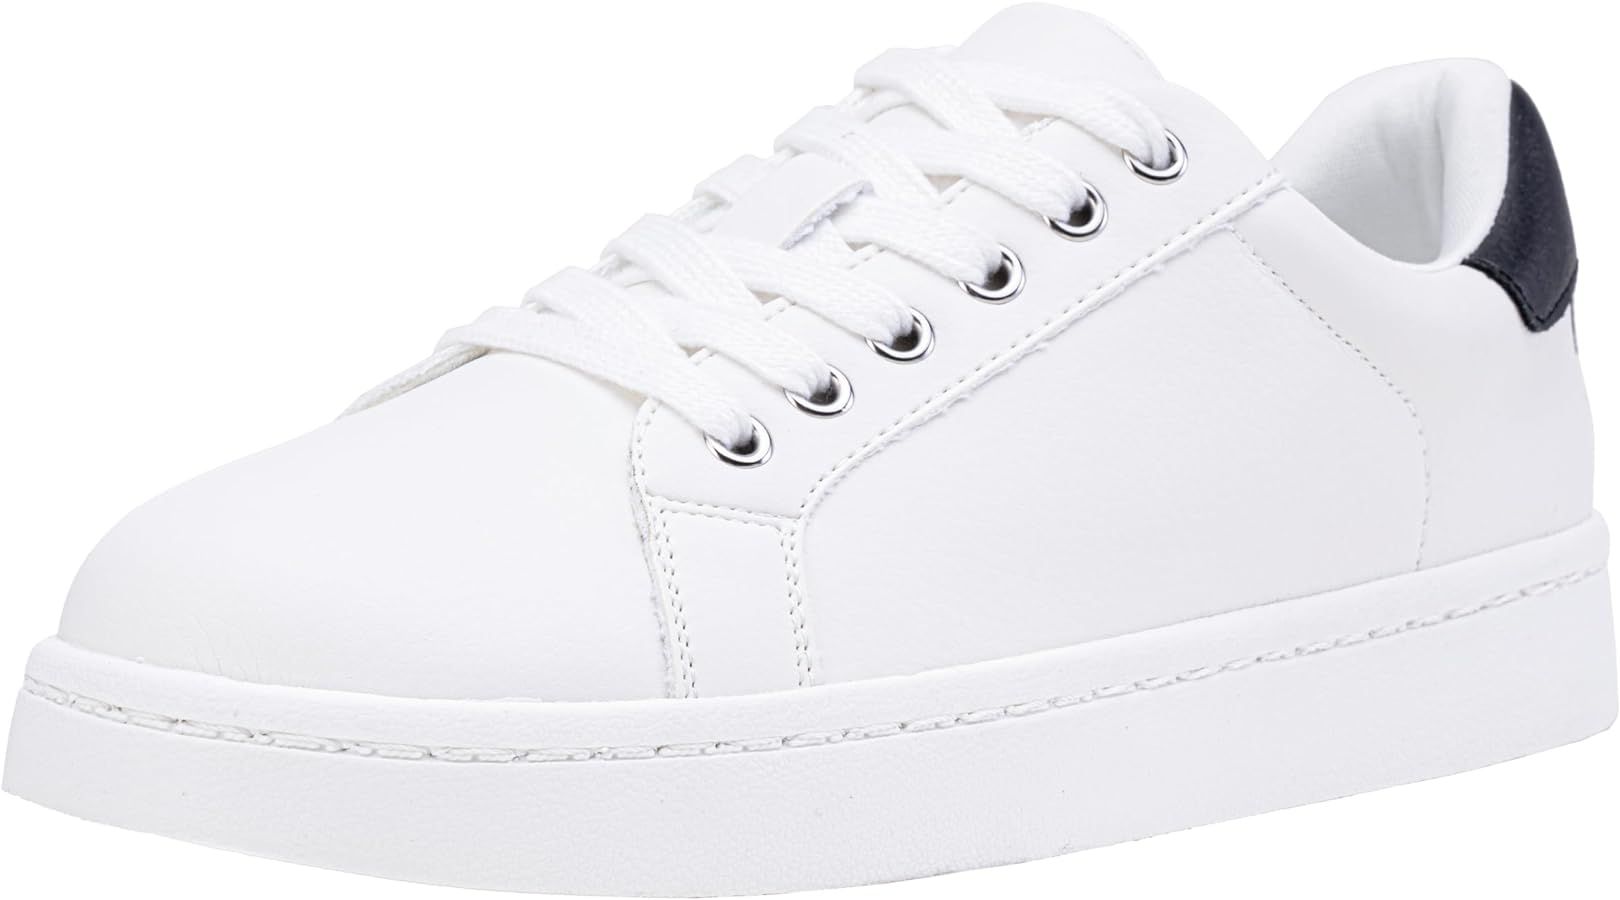 Vepose Women's 8003 Fashion Lace Up Comfortable Casual Tennis Sneakers | Amazon (US)